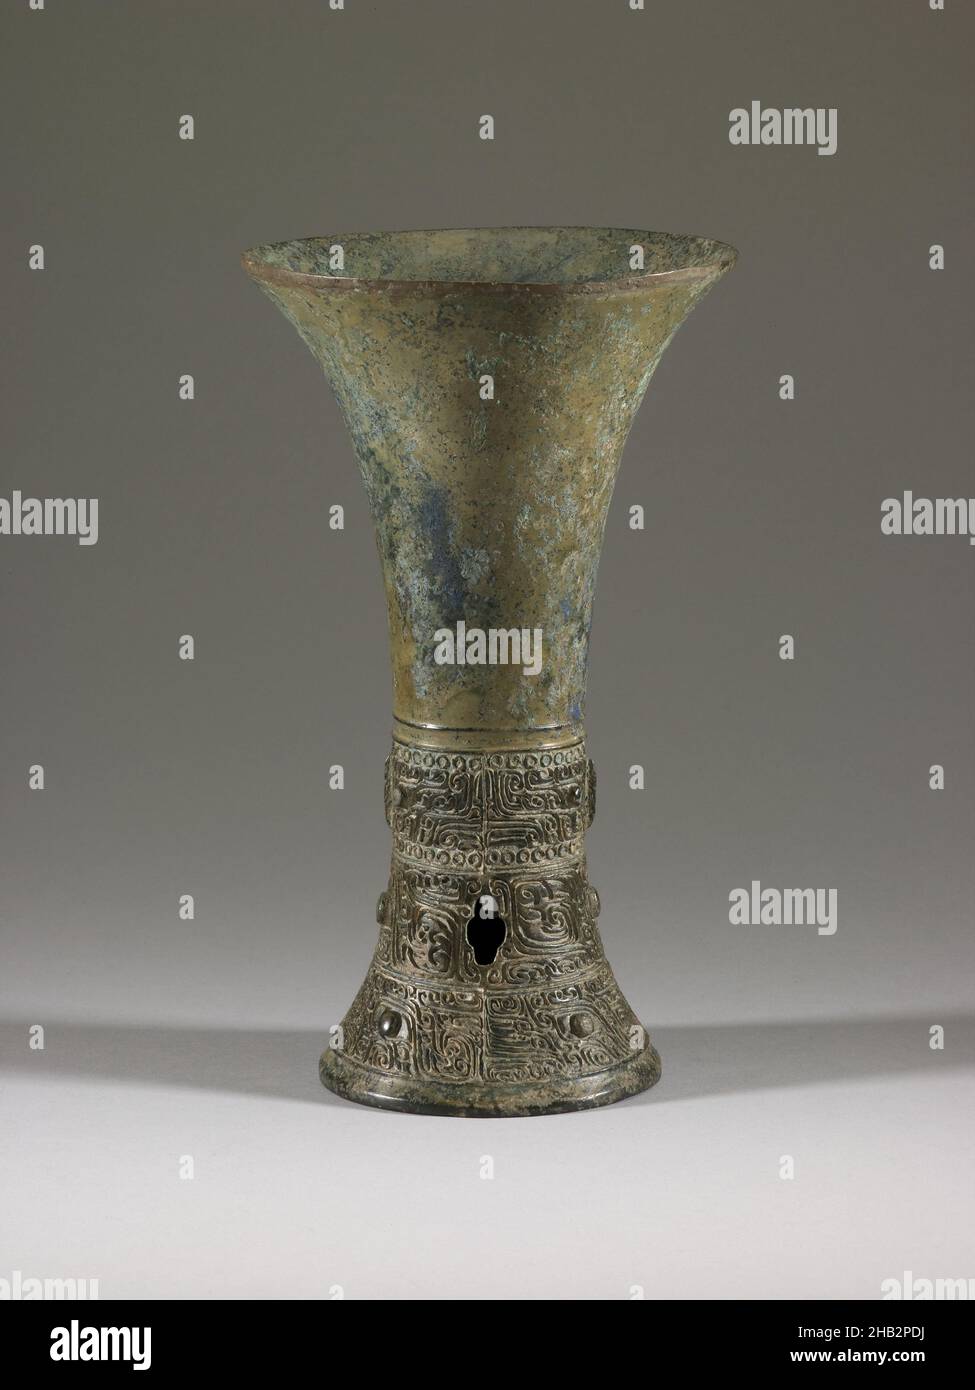 Wine Vessel (gu) with Design of Zoomorphic Masks and Spiral Patterns, Chinese, Shang dynasty, 1600–1050 BC, late 14th–early 13th century BC, Bronze, China, Asia, Containers, metalwork, height: 8 1/2 in. (21.6 cm Stock Photo